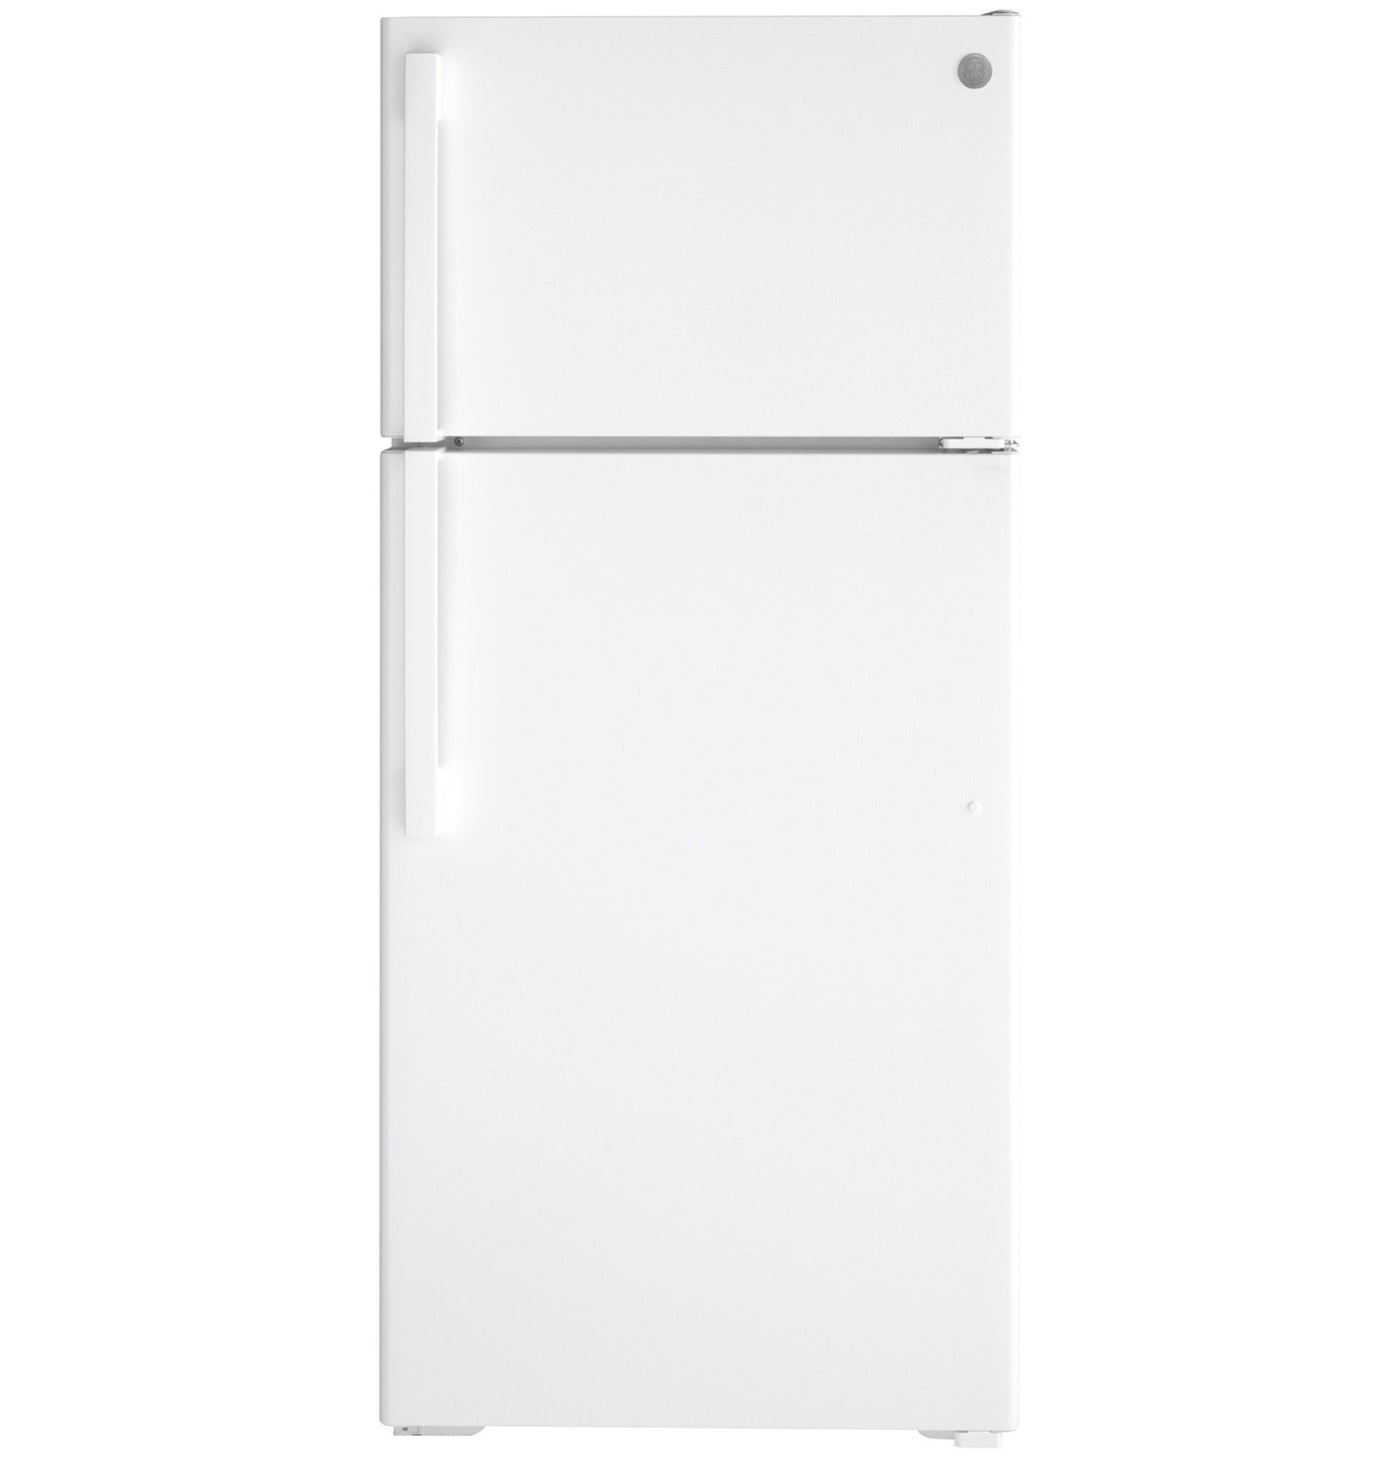 GE White Top Mount Refrigerator (16.6 Cu.Ft.) - GTE17DTNRWW